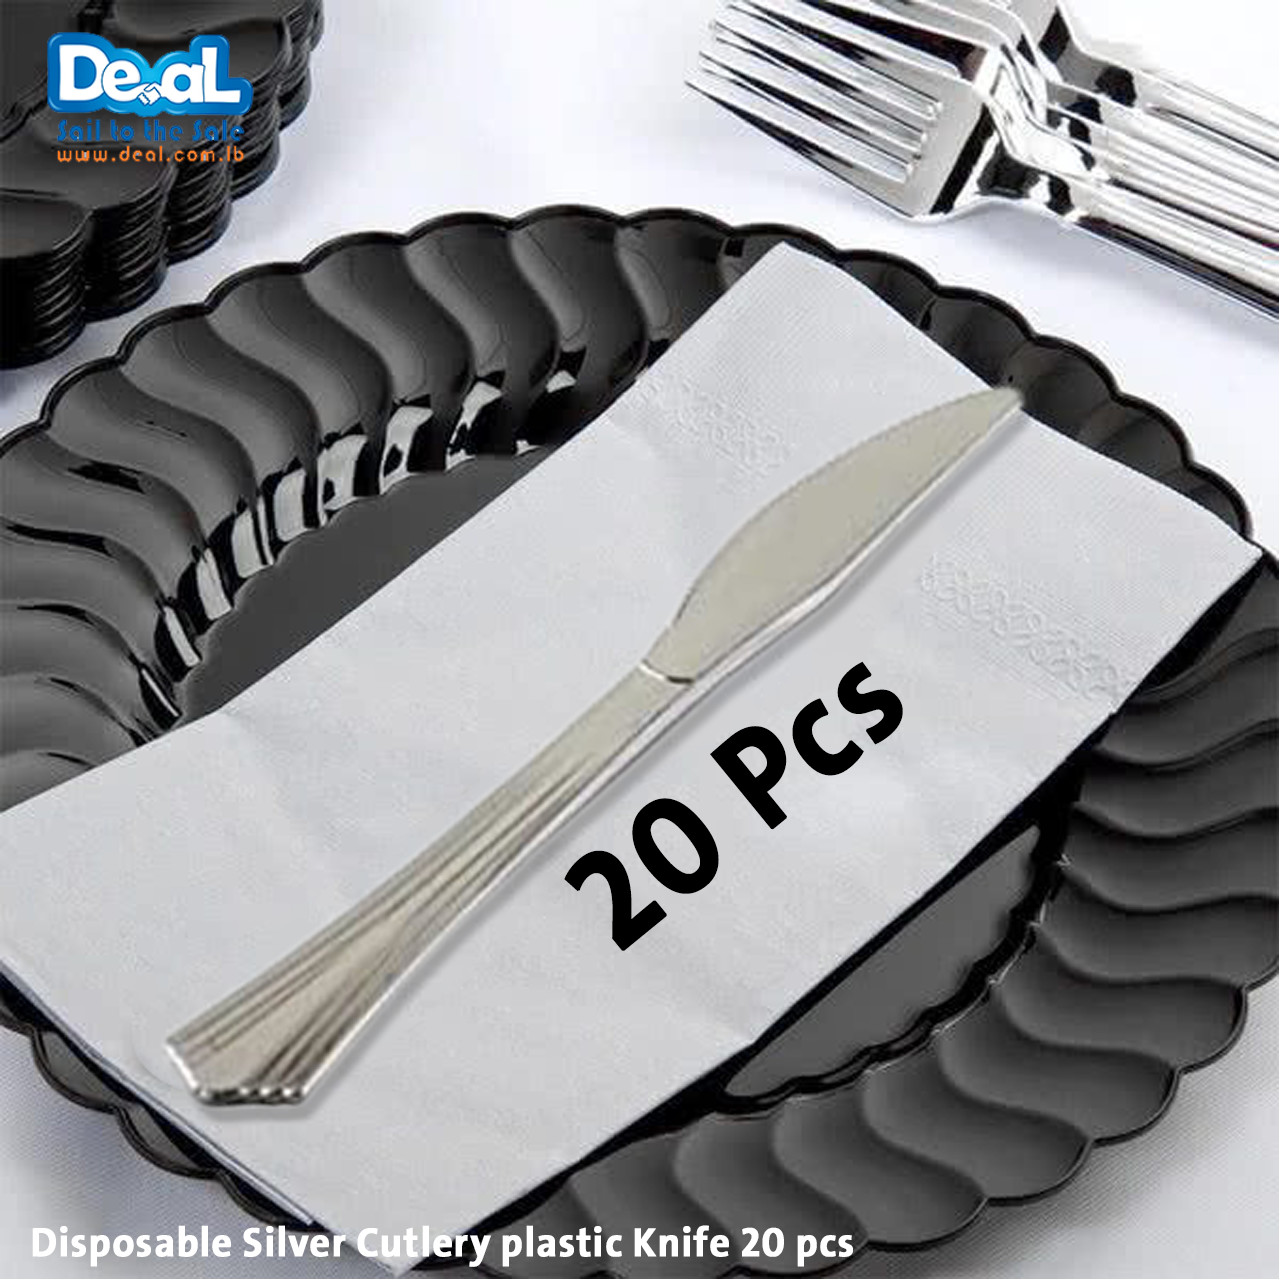 Disposable Silver Cutlery  plastic Knife 20 pcs